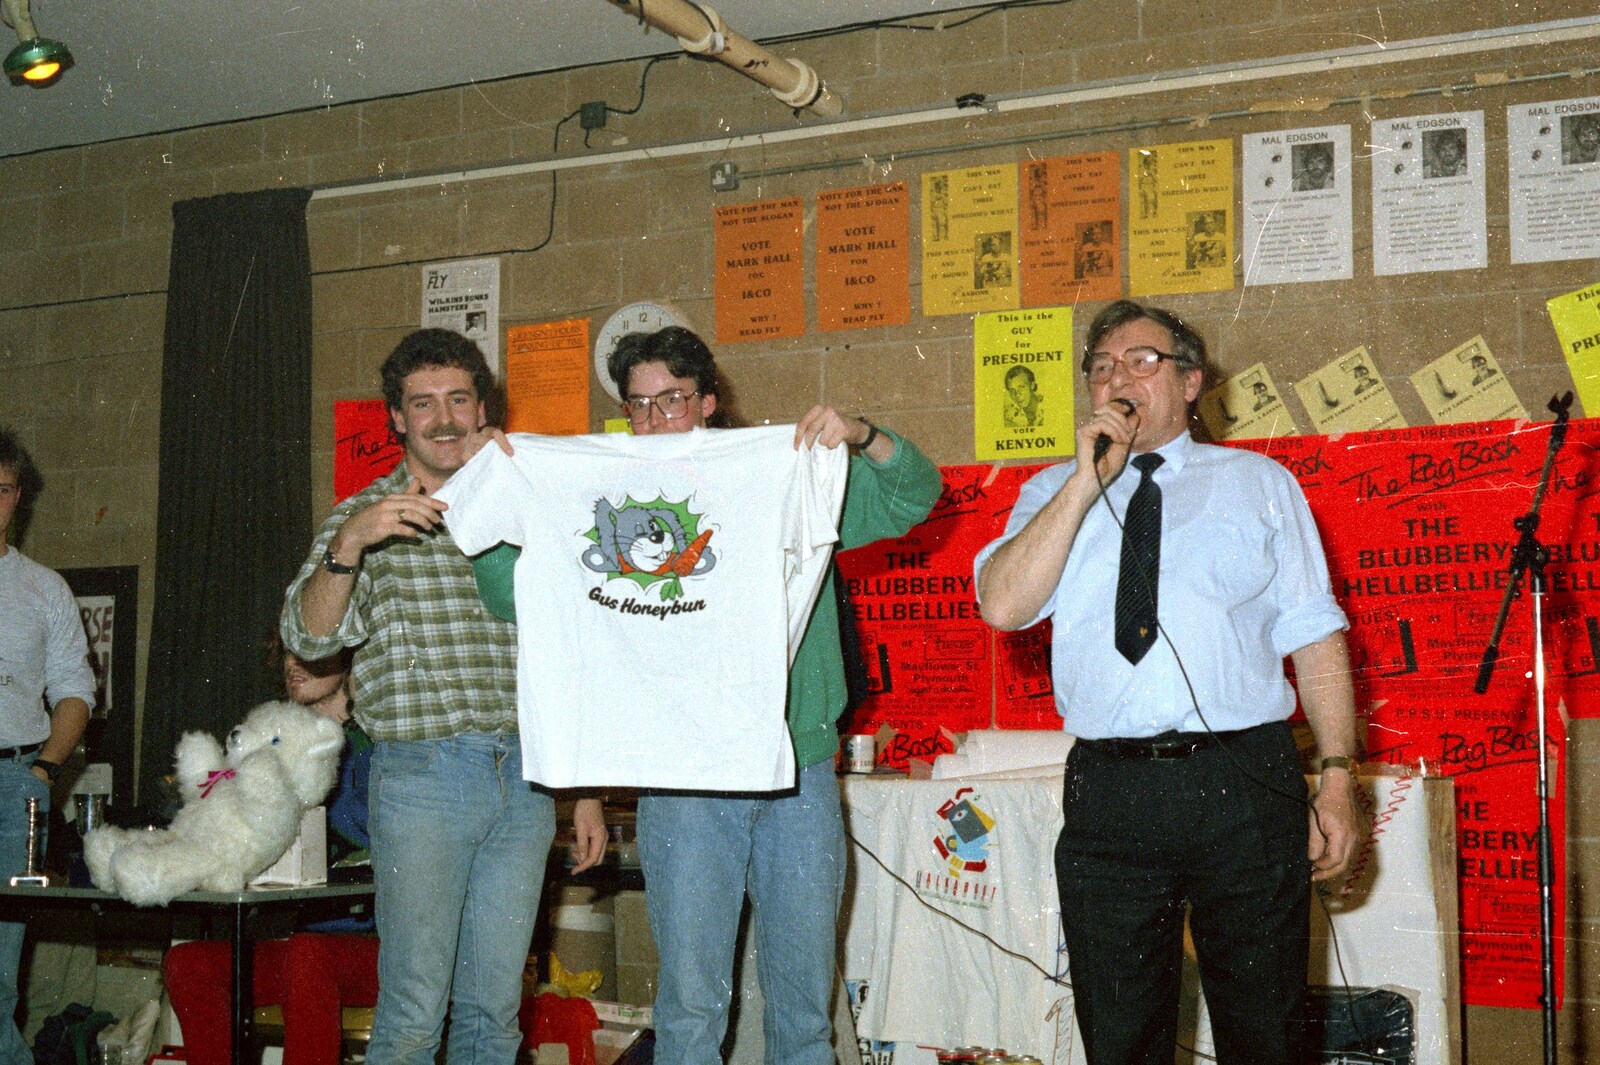 A Gus Honeybun teeshirt is up for grabs from Uni: Pirate RAG Bash, Games Nights and Brian's Beard, PPSU, Plymouth - 10th February 1987